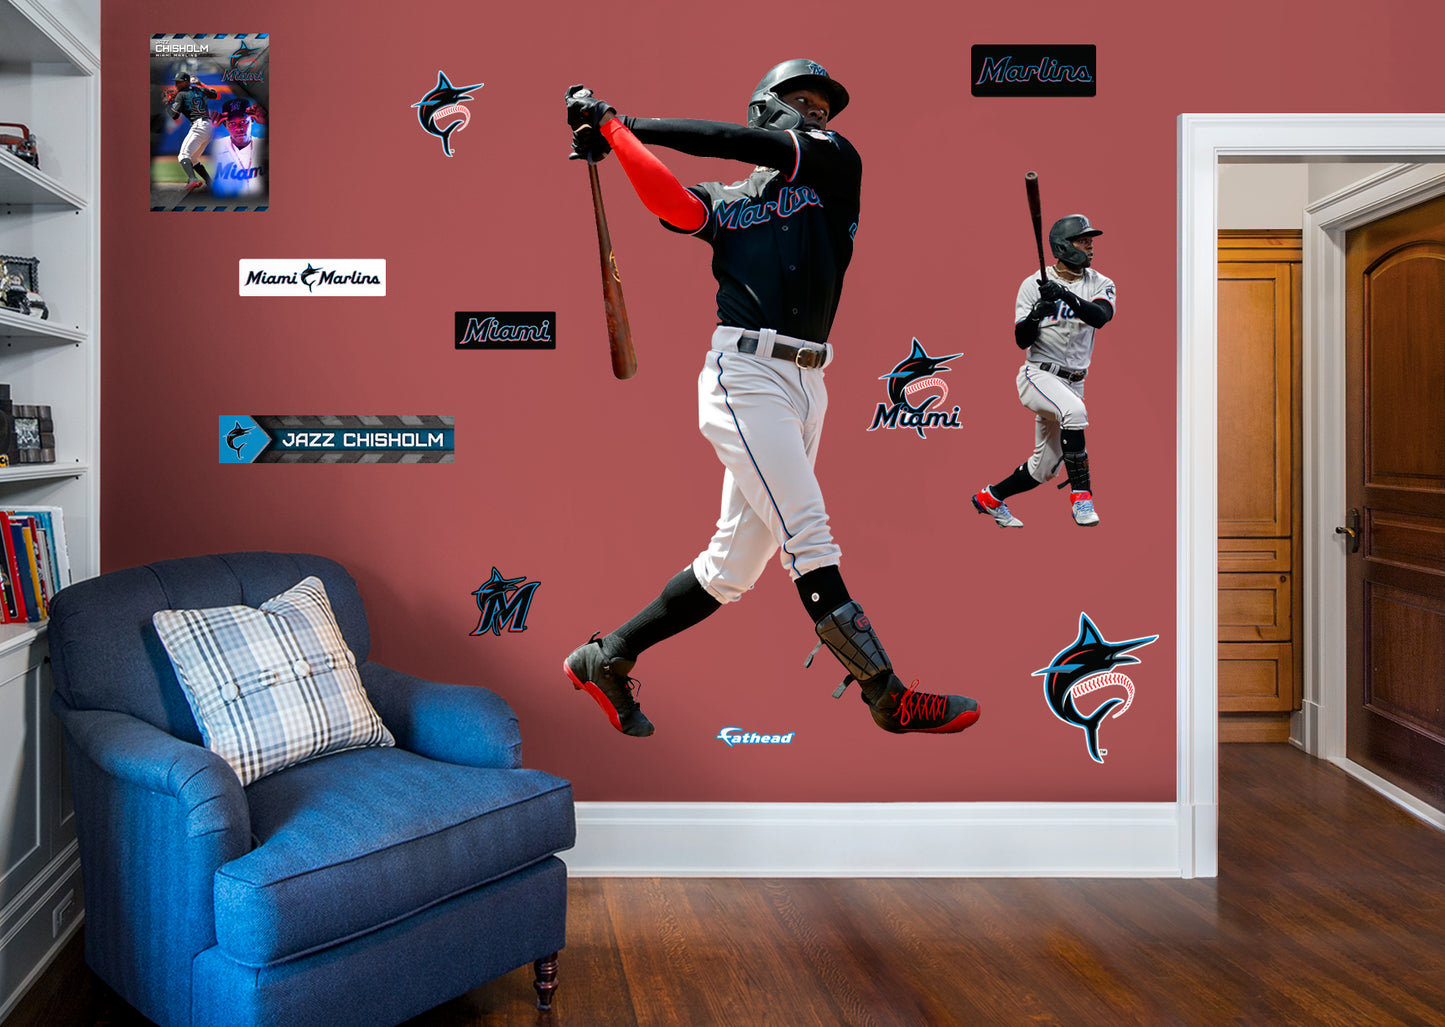 Miami Marlins: Jazz Chisholm Jr. 2021        - Officially Licensed MLB Removable Wall   Adhesive Decal